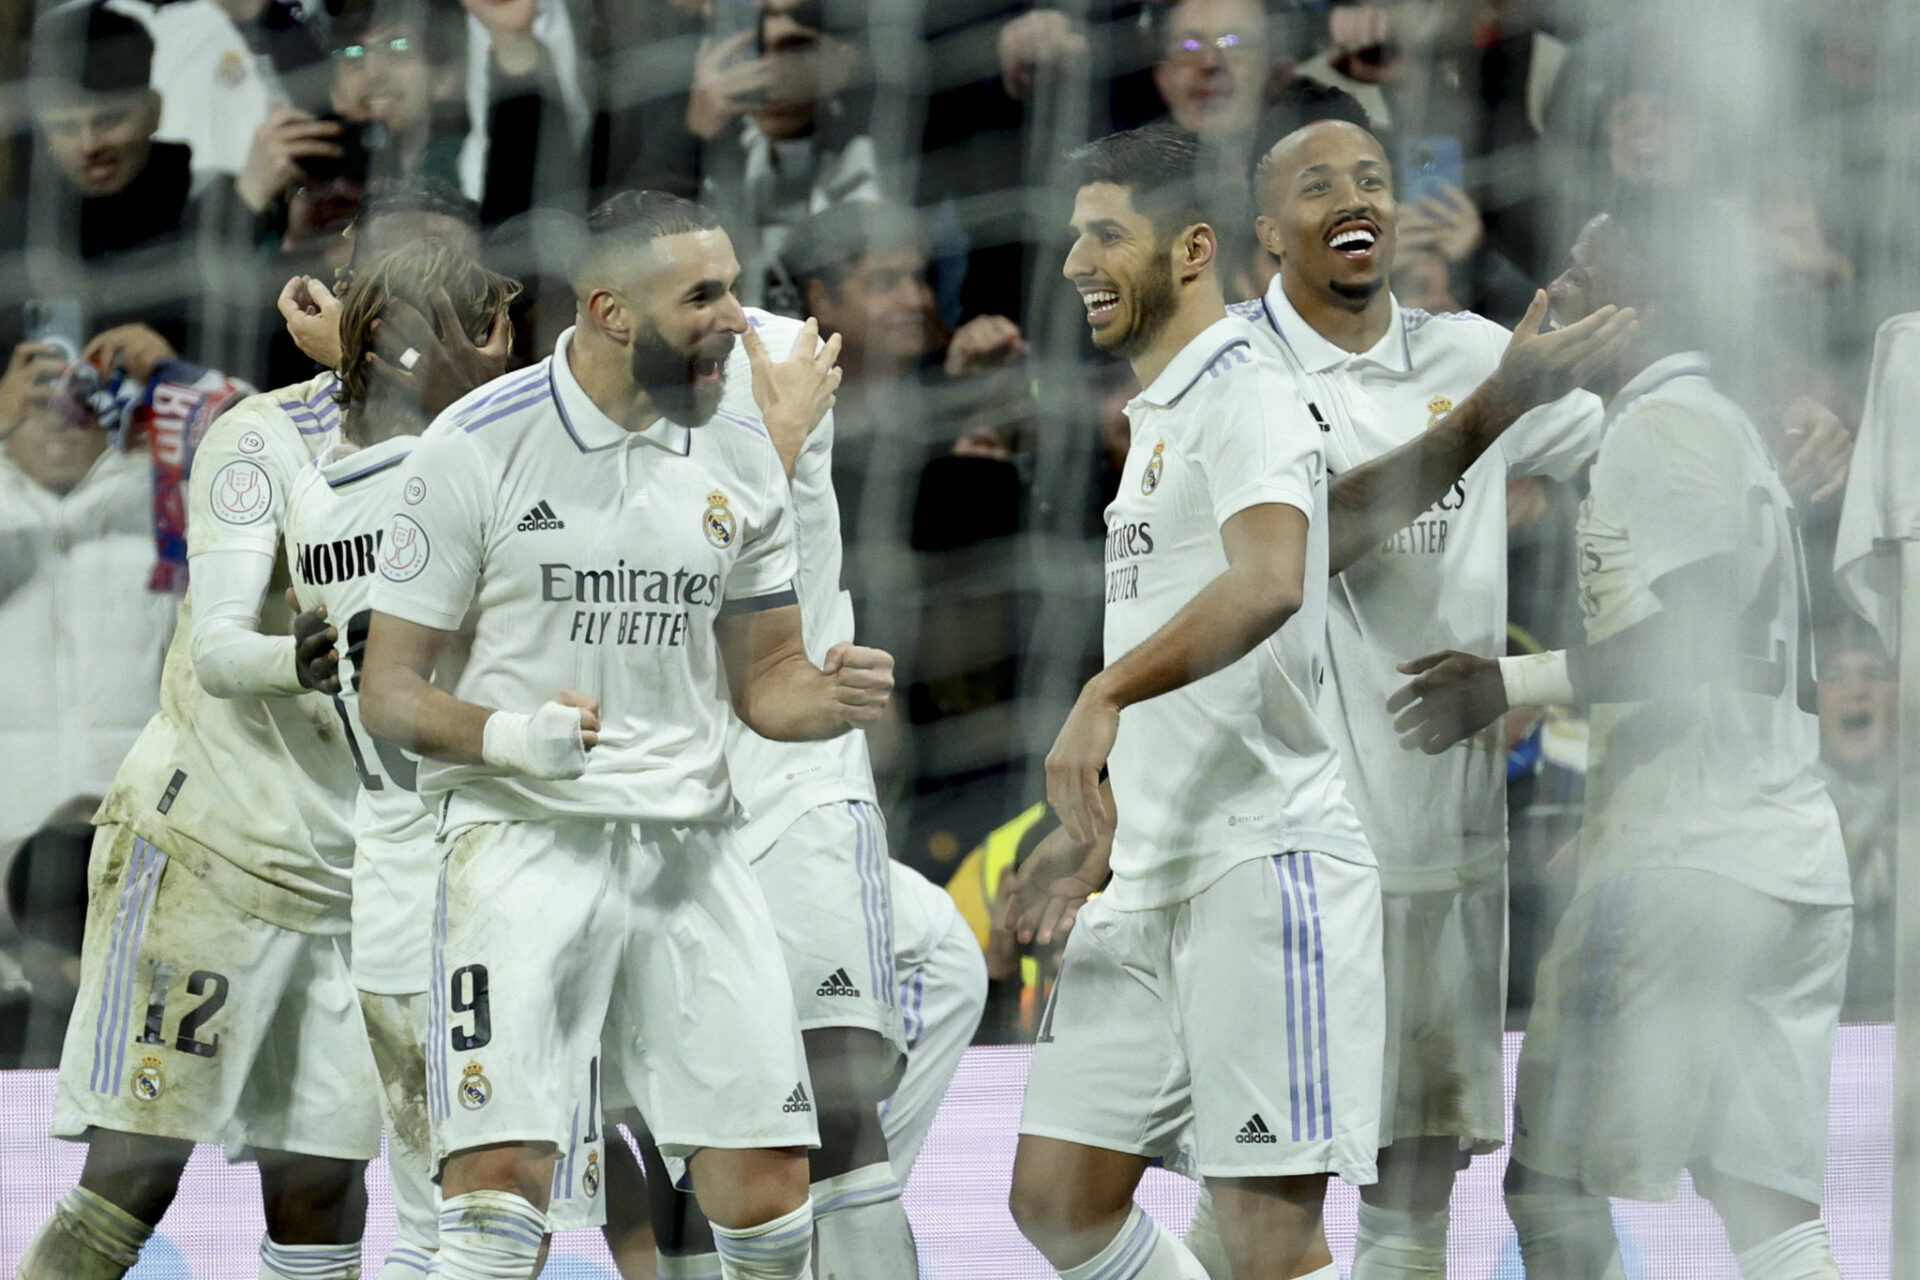 Real Madrid defeated Atletico Madrid 3-1 to go to the Copa del Rey semifinal along with Barcelona